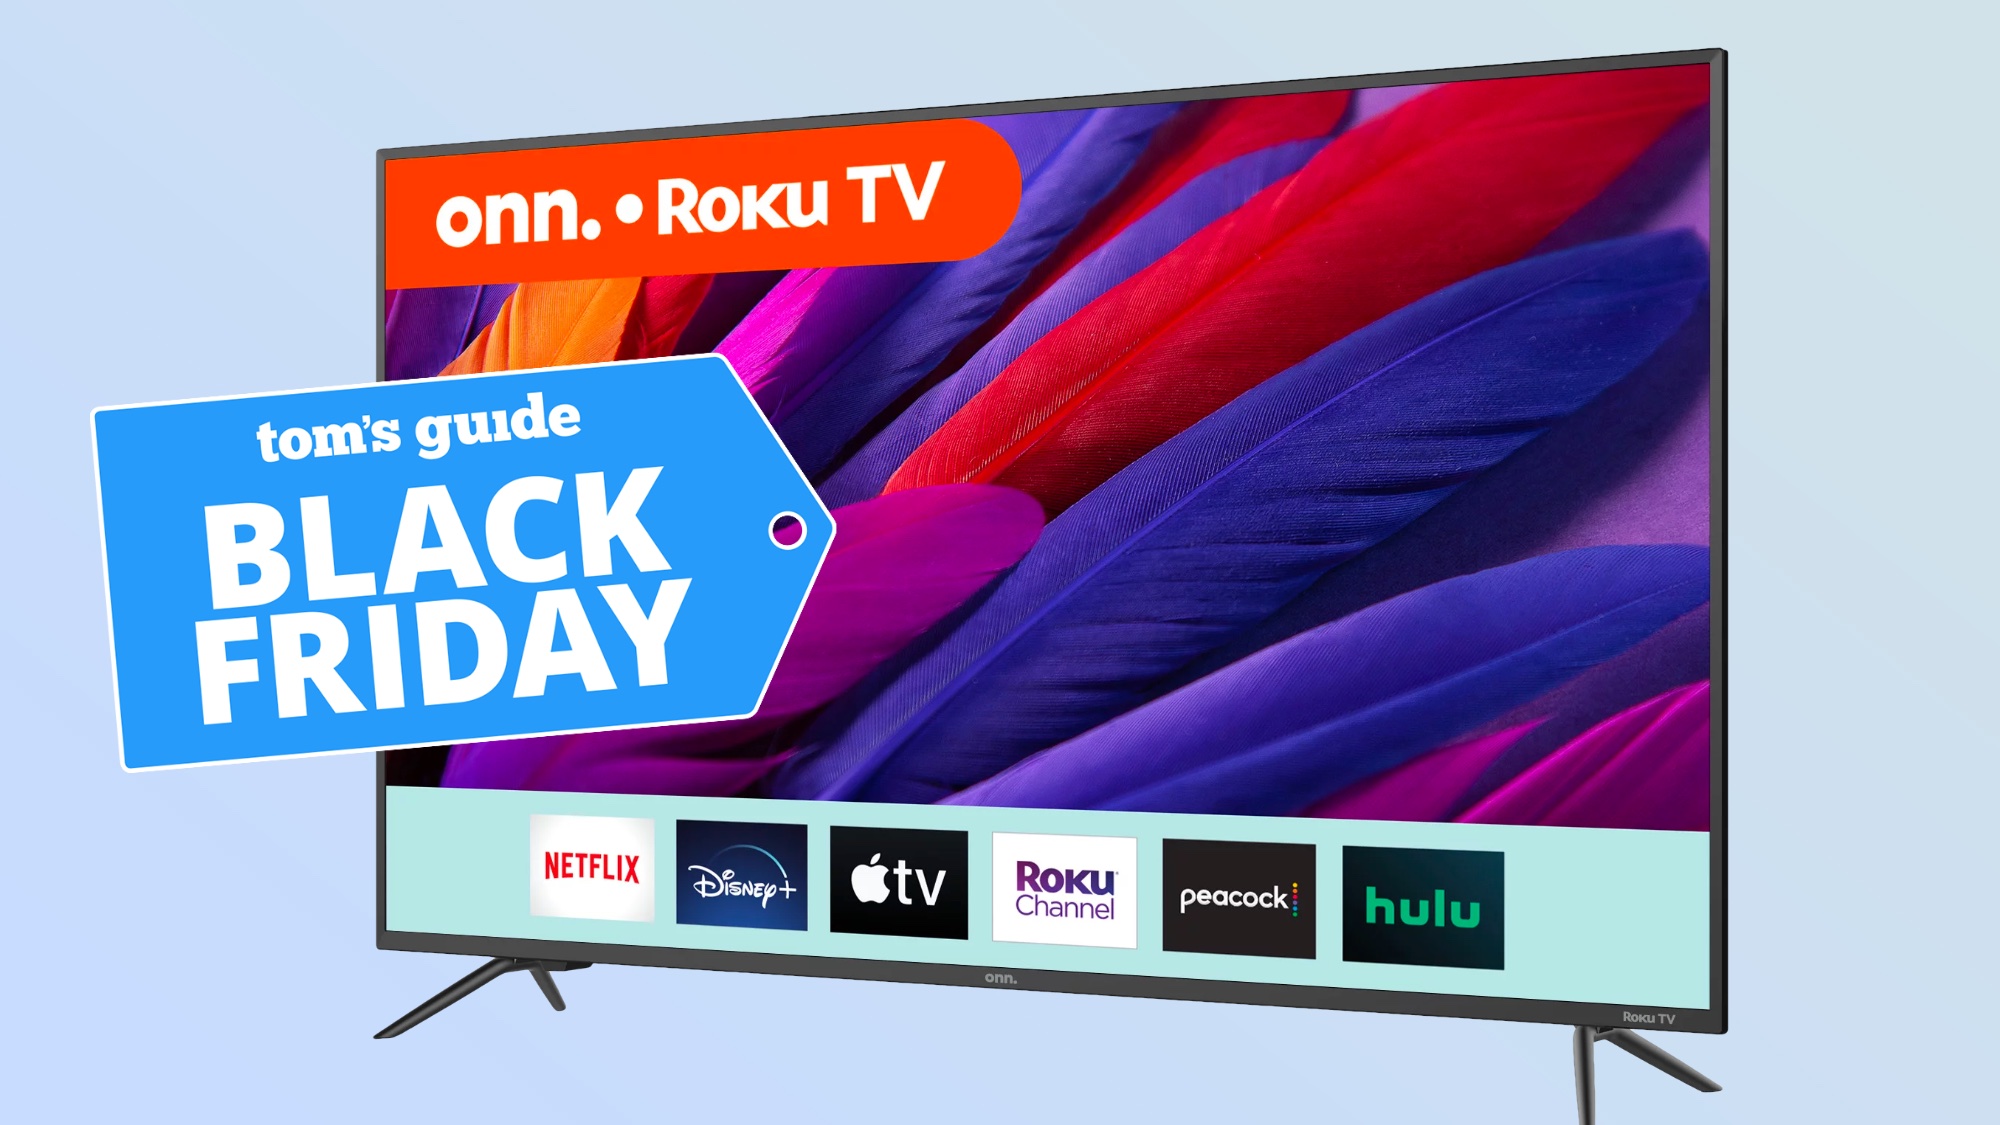 Crazy deal alert: This 50-inch 4K HDR Roku TV is less than $200 today